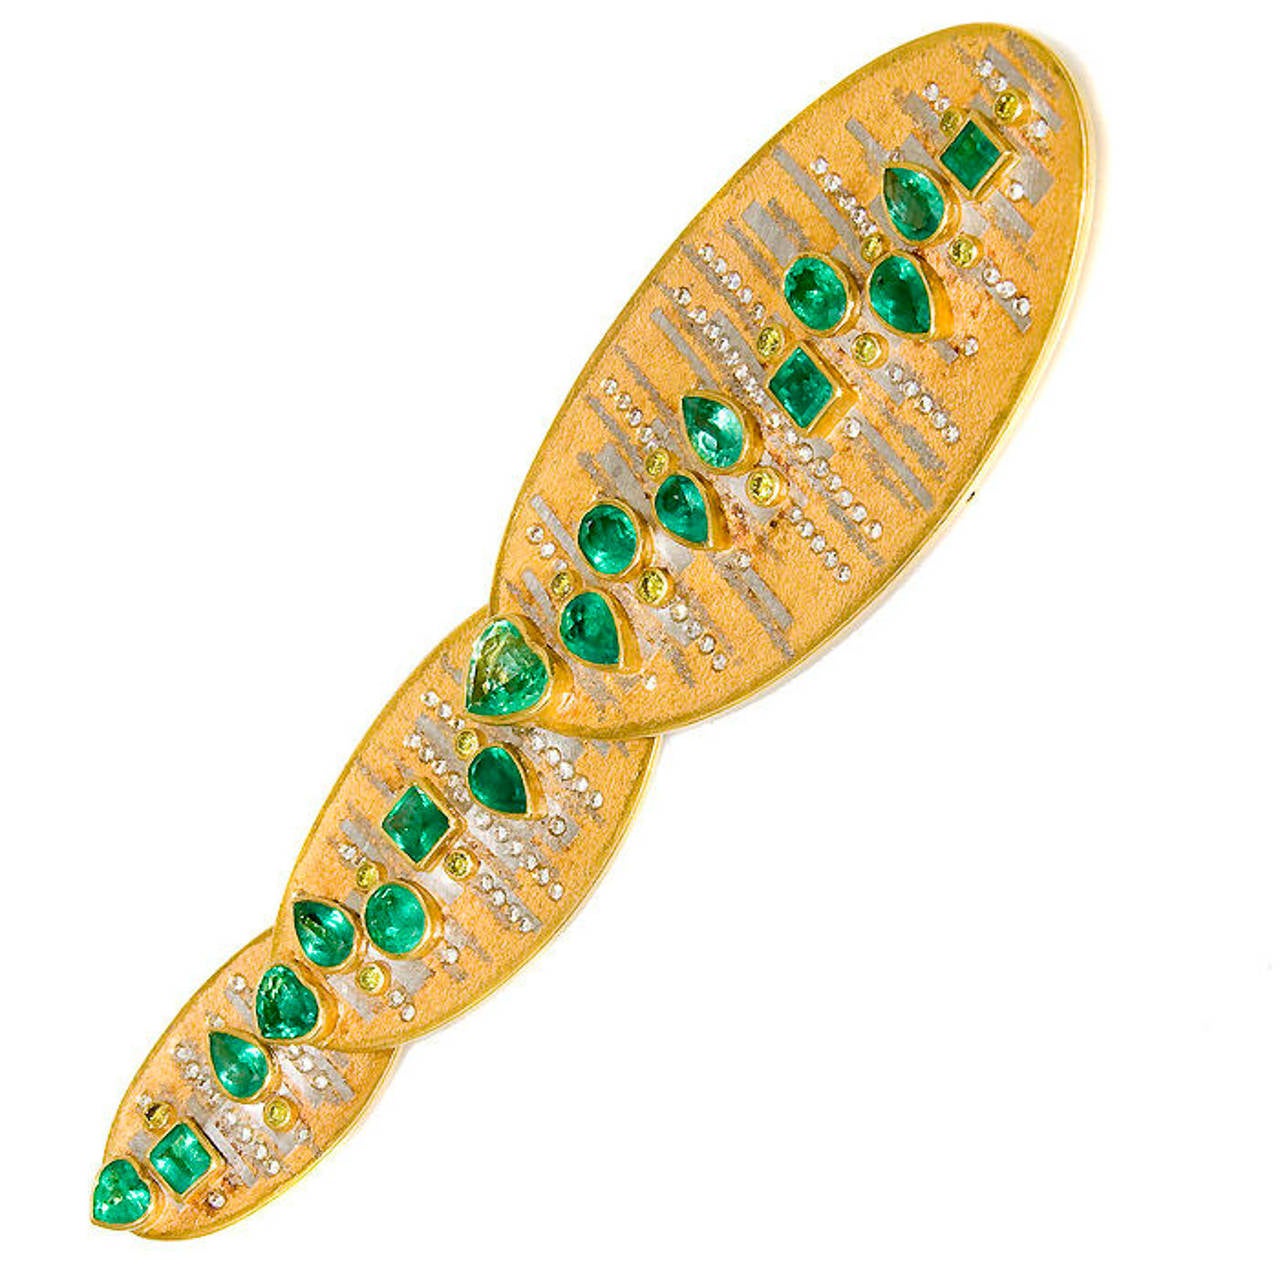 A one of a kind emerald and diamond pendant/brooch by Michael Zobel, mounted in 18 karat white and yellow gold, set with white and fancy greenish yellow diamonds and emeralds in various shapes.  
This piece is articulated and can be worn as a